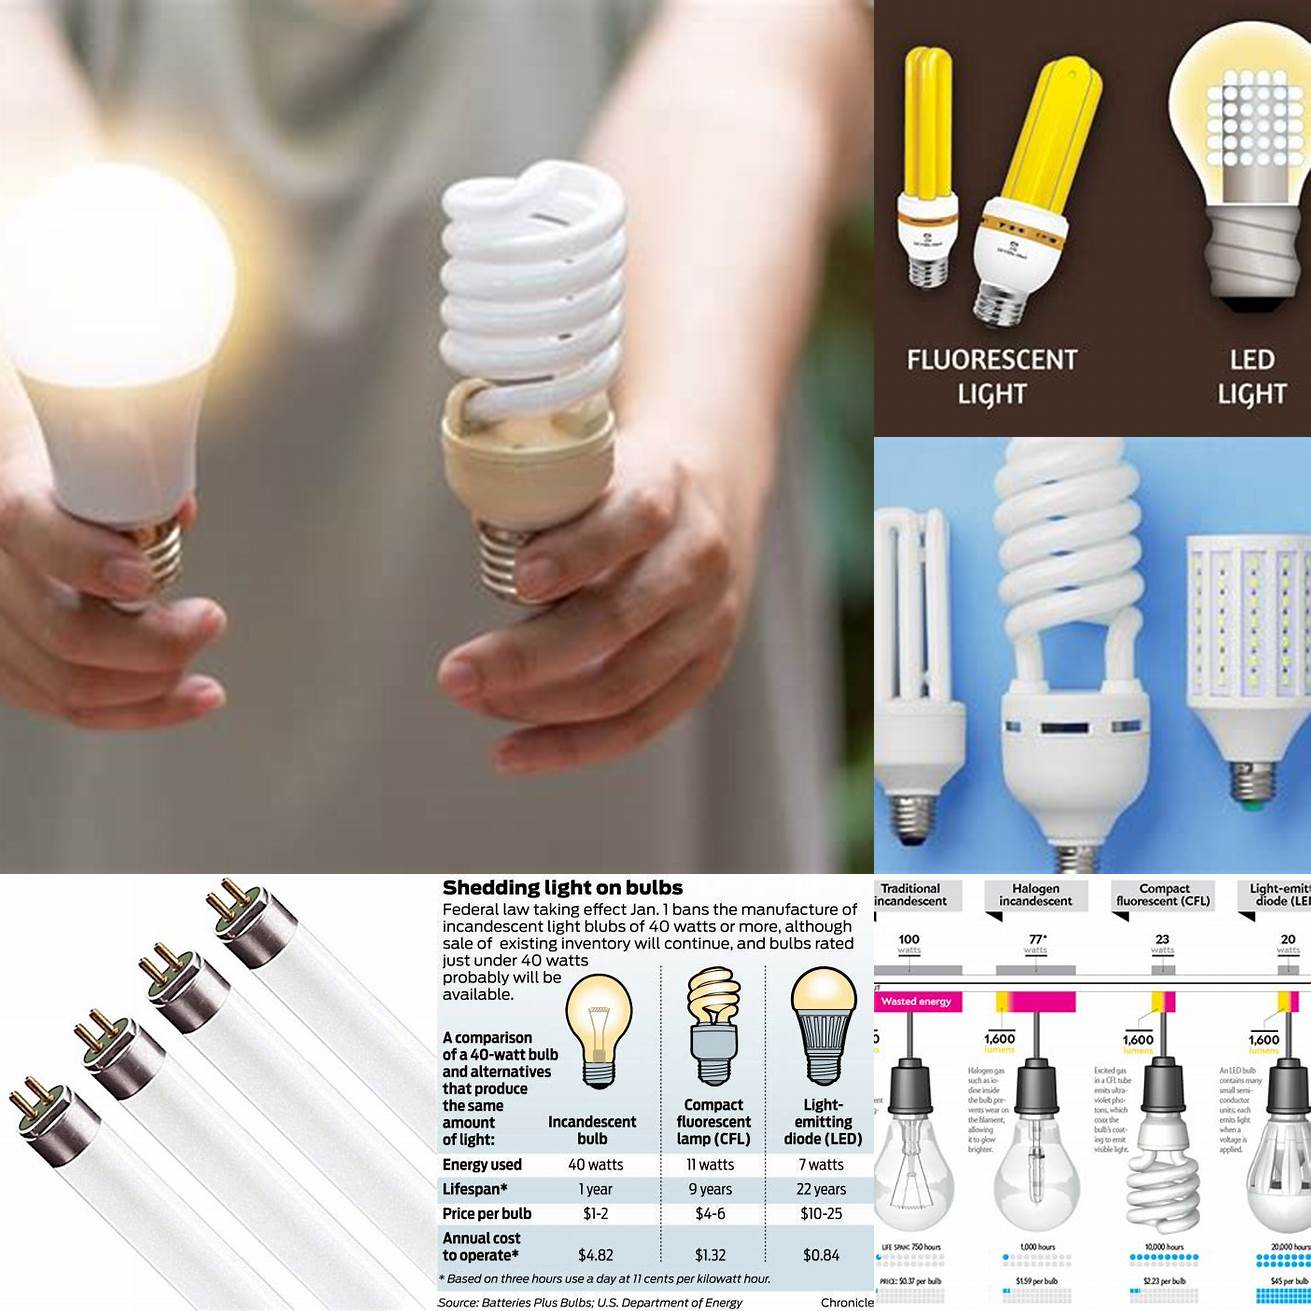 Cost Fluorescent bulbs can be more expensive upfront than traditional incandescent bulbs